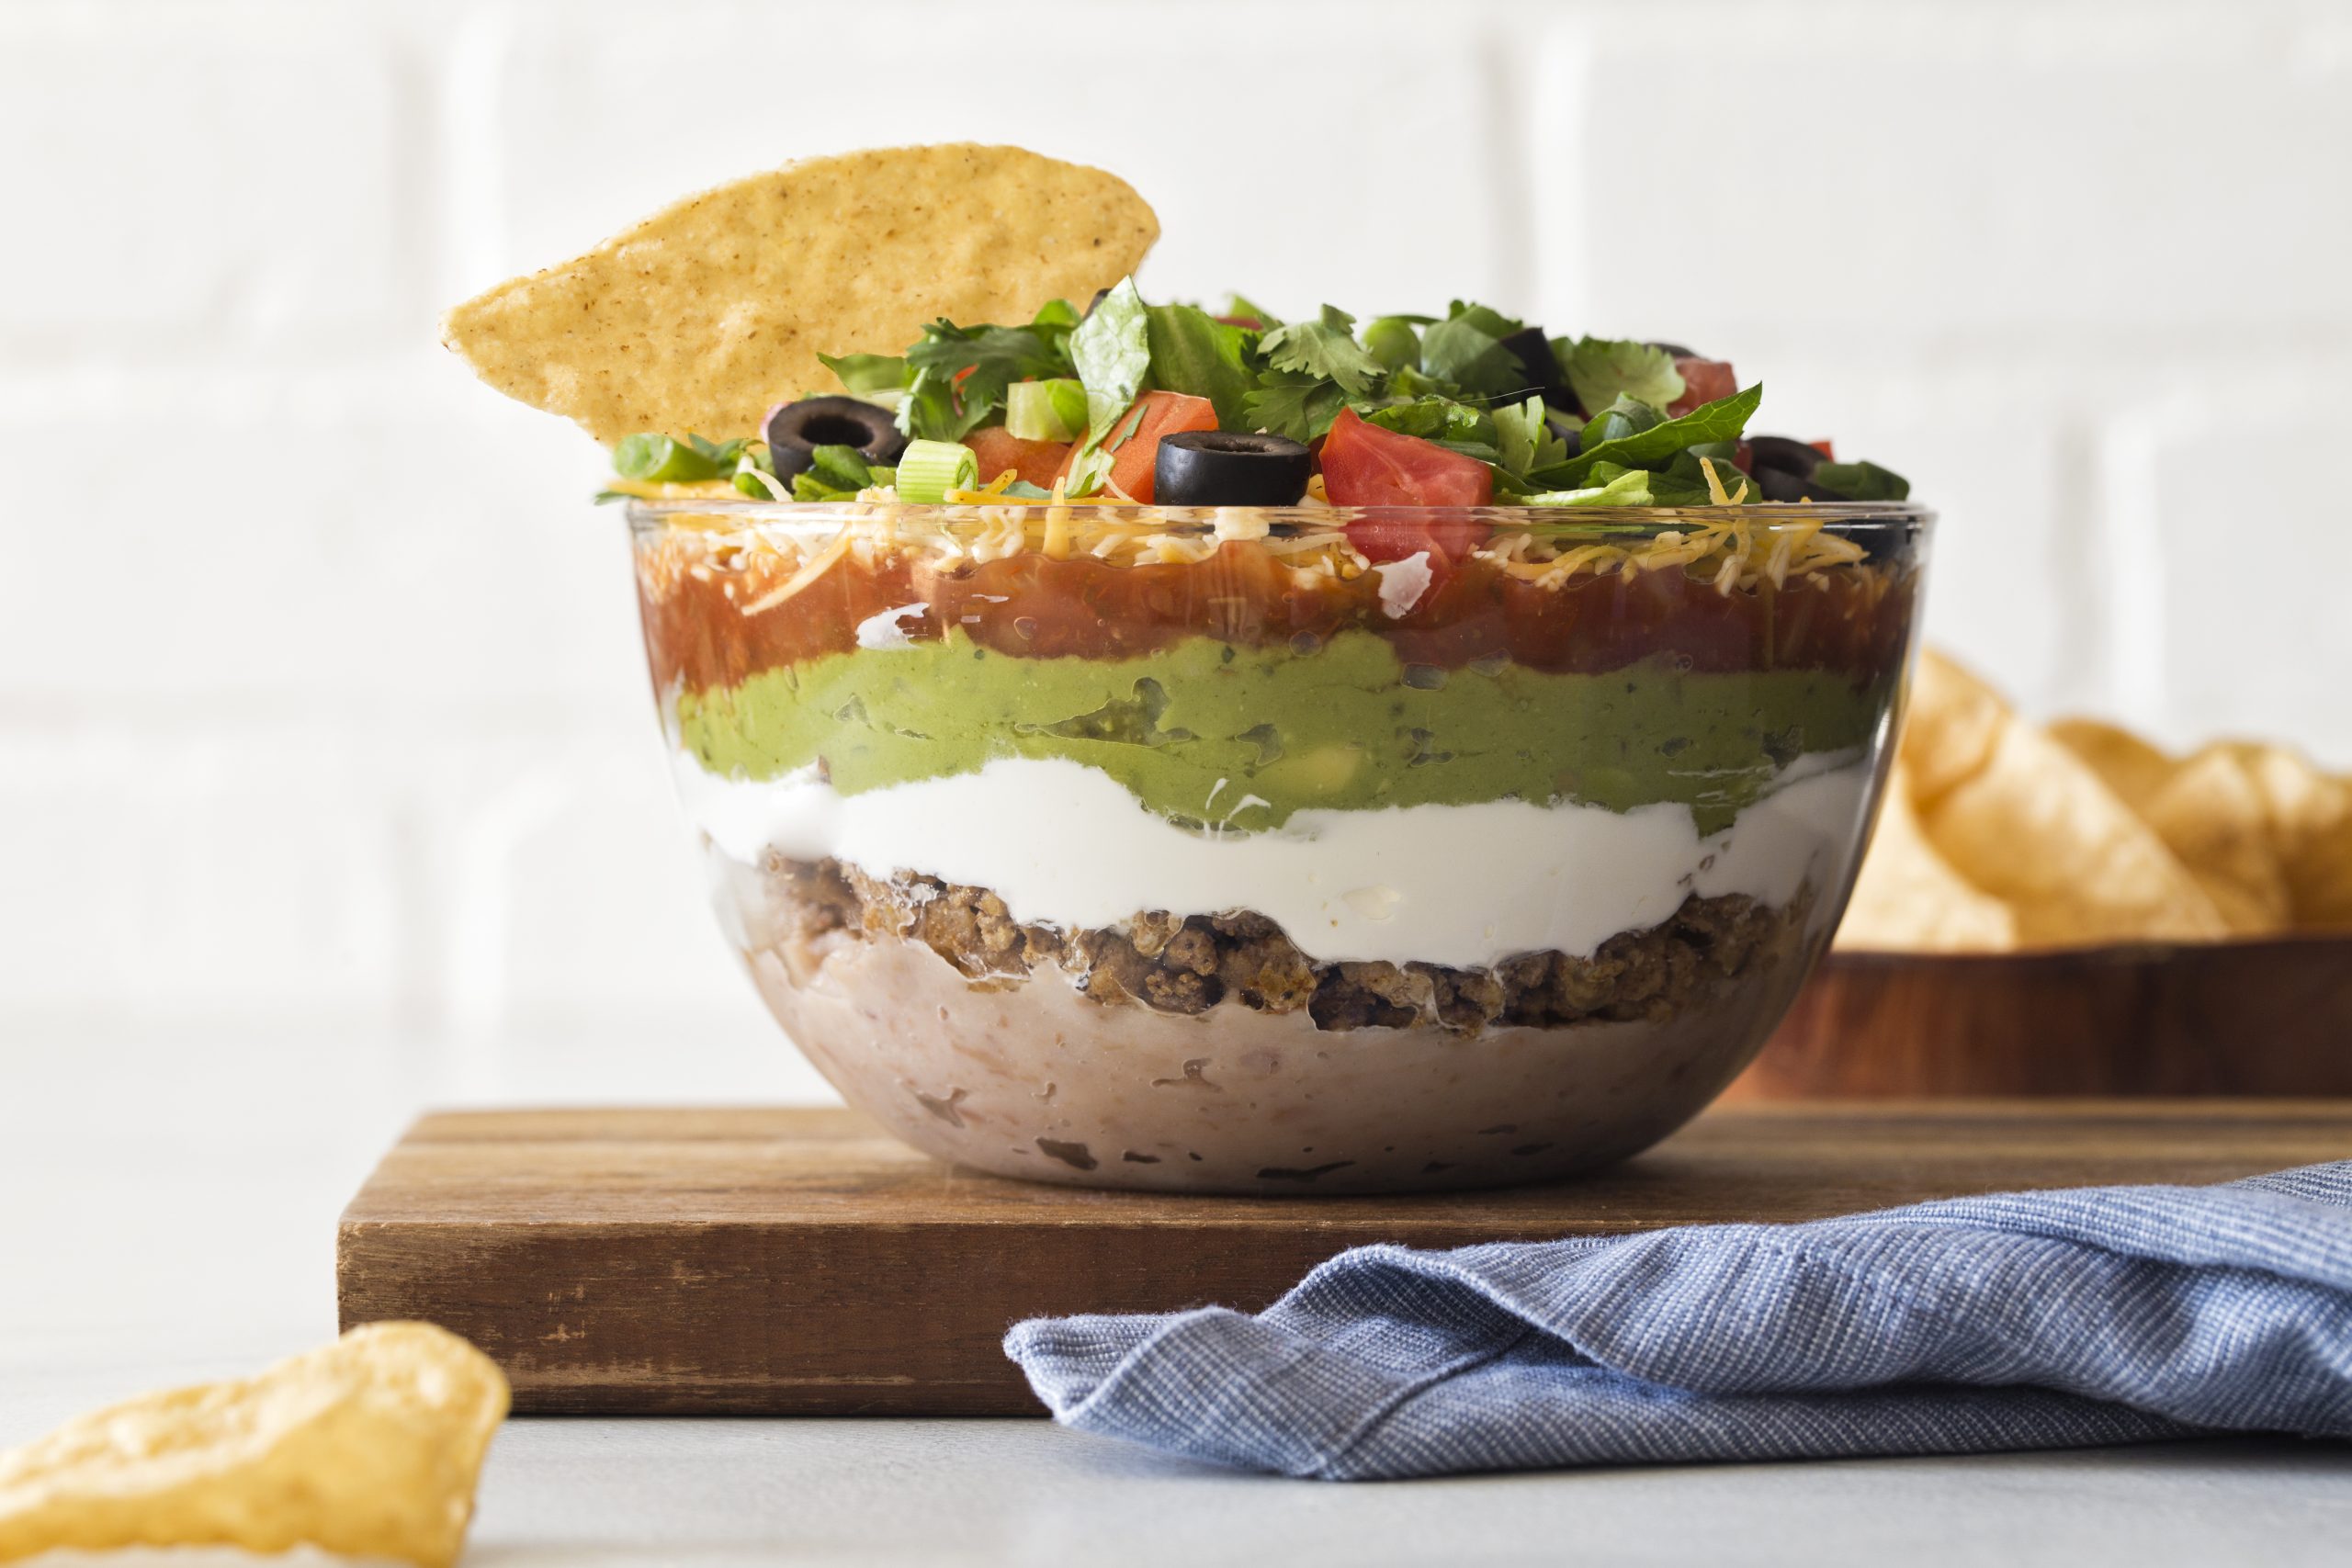 7 Layer Taco Dip, THE tailgating snack featuring layers of seasoned ground veal, creamy refried beans, sour cream, fresh guacamole and more!